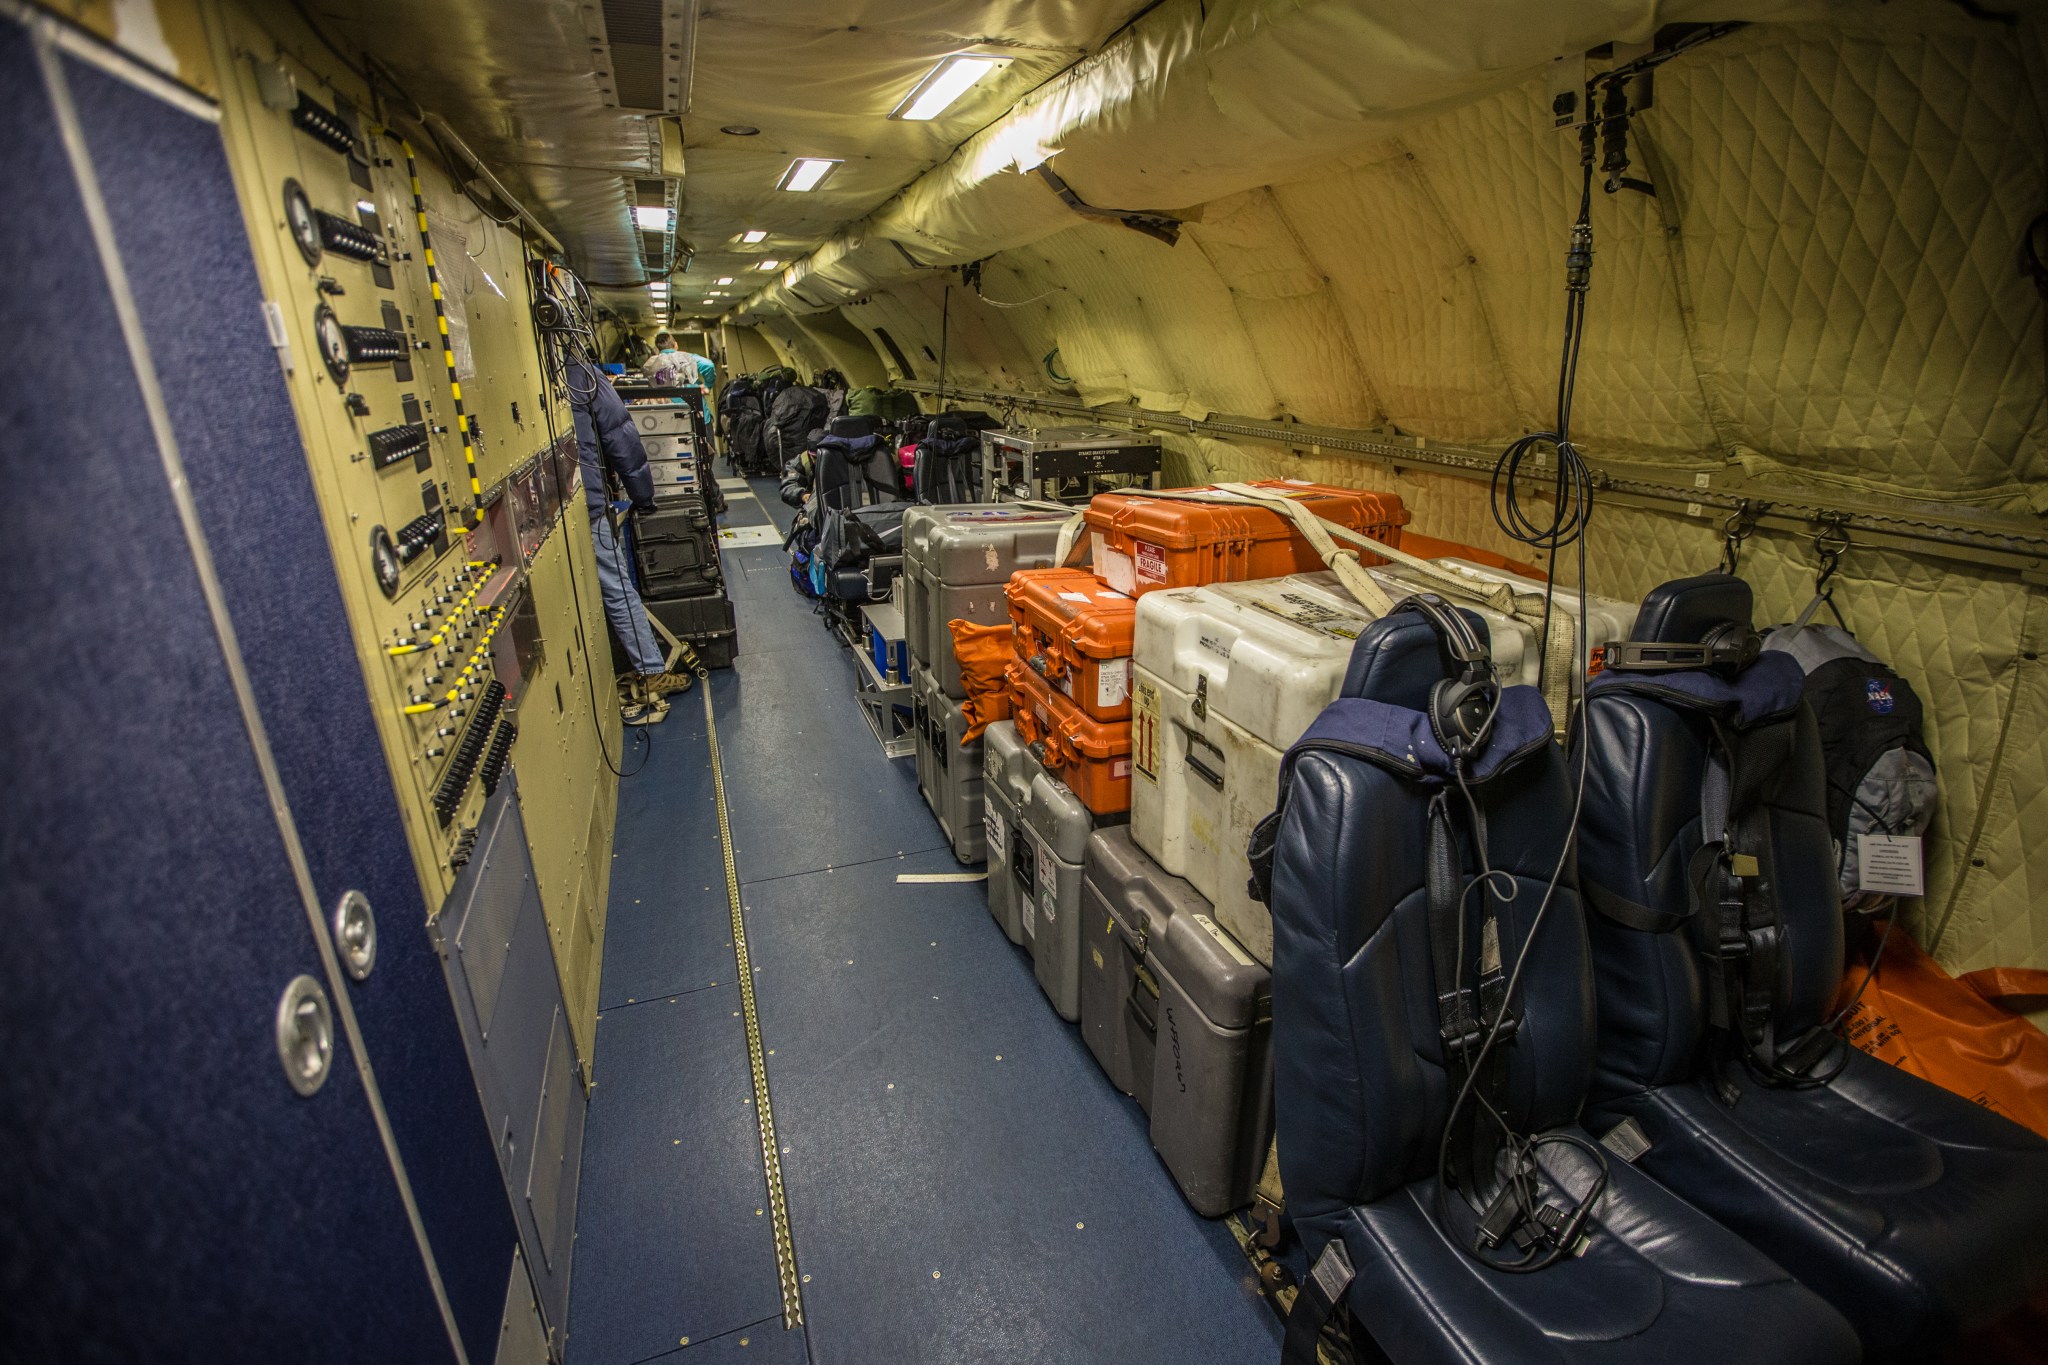 Inside the P-3 plane showing a row of cargo on one side and equipment racks on the other.